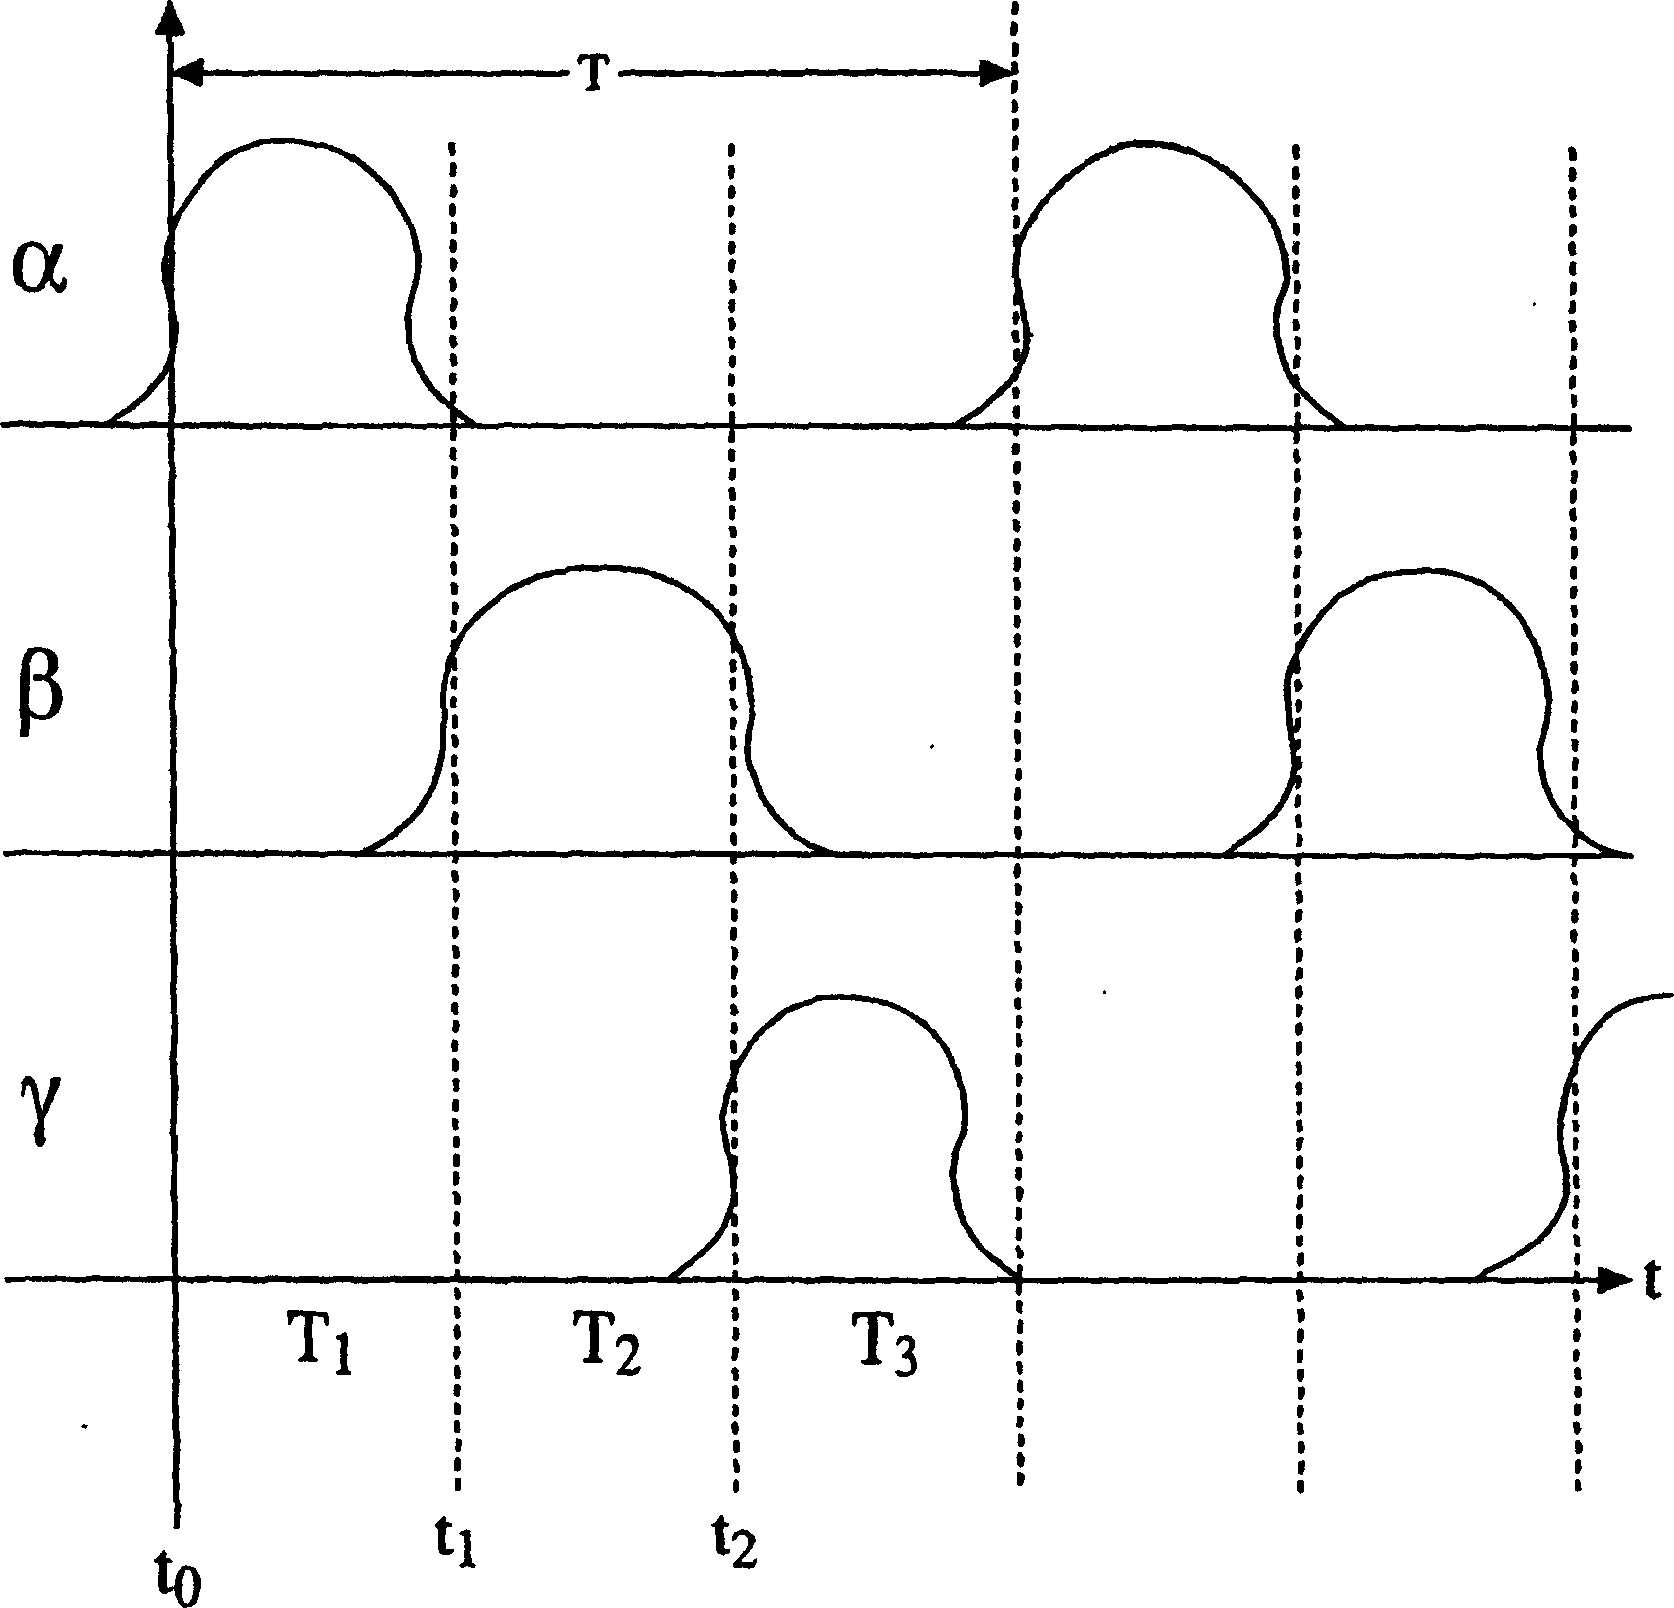 Modified scheduling technique for a telecommunication system